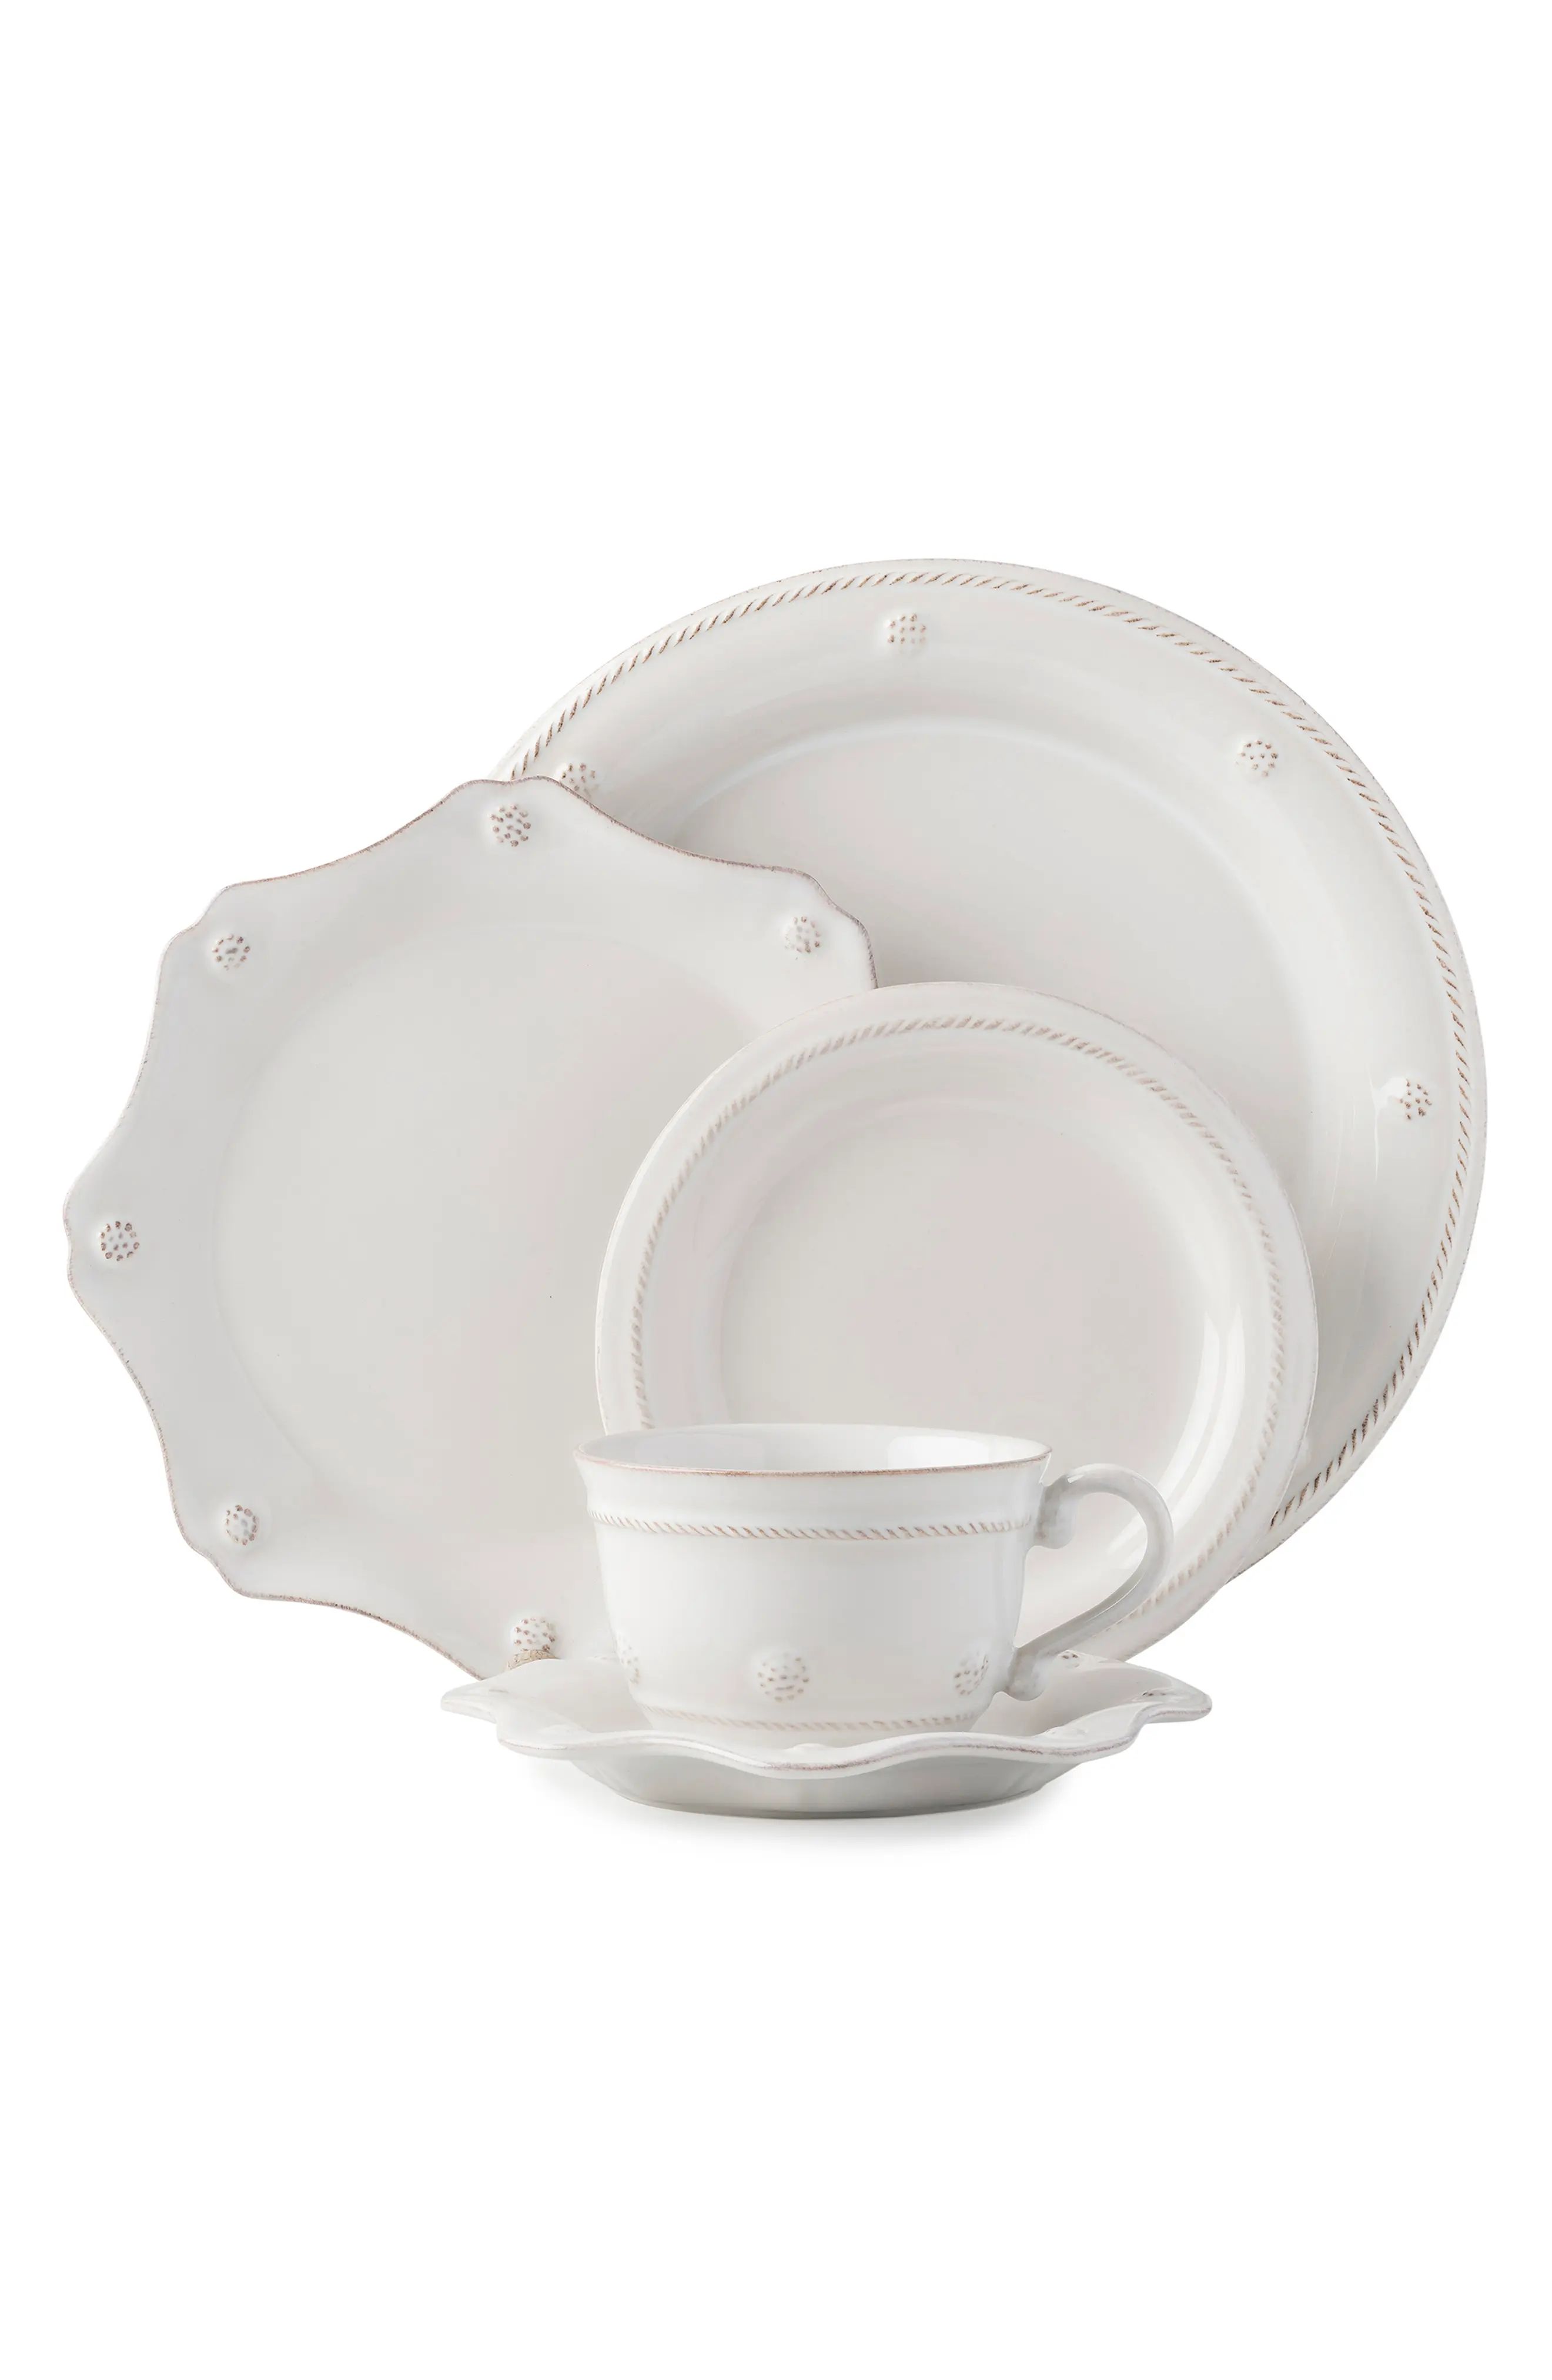 Juliska Berry & Thread Whitewash 5-Piece Place Setting With Teacup | Nordstrom